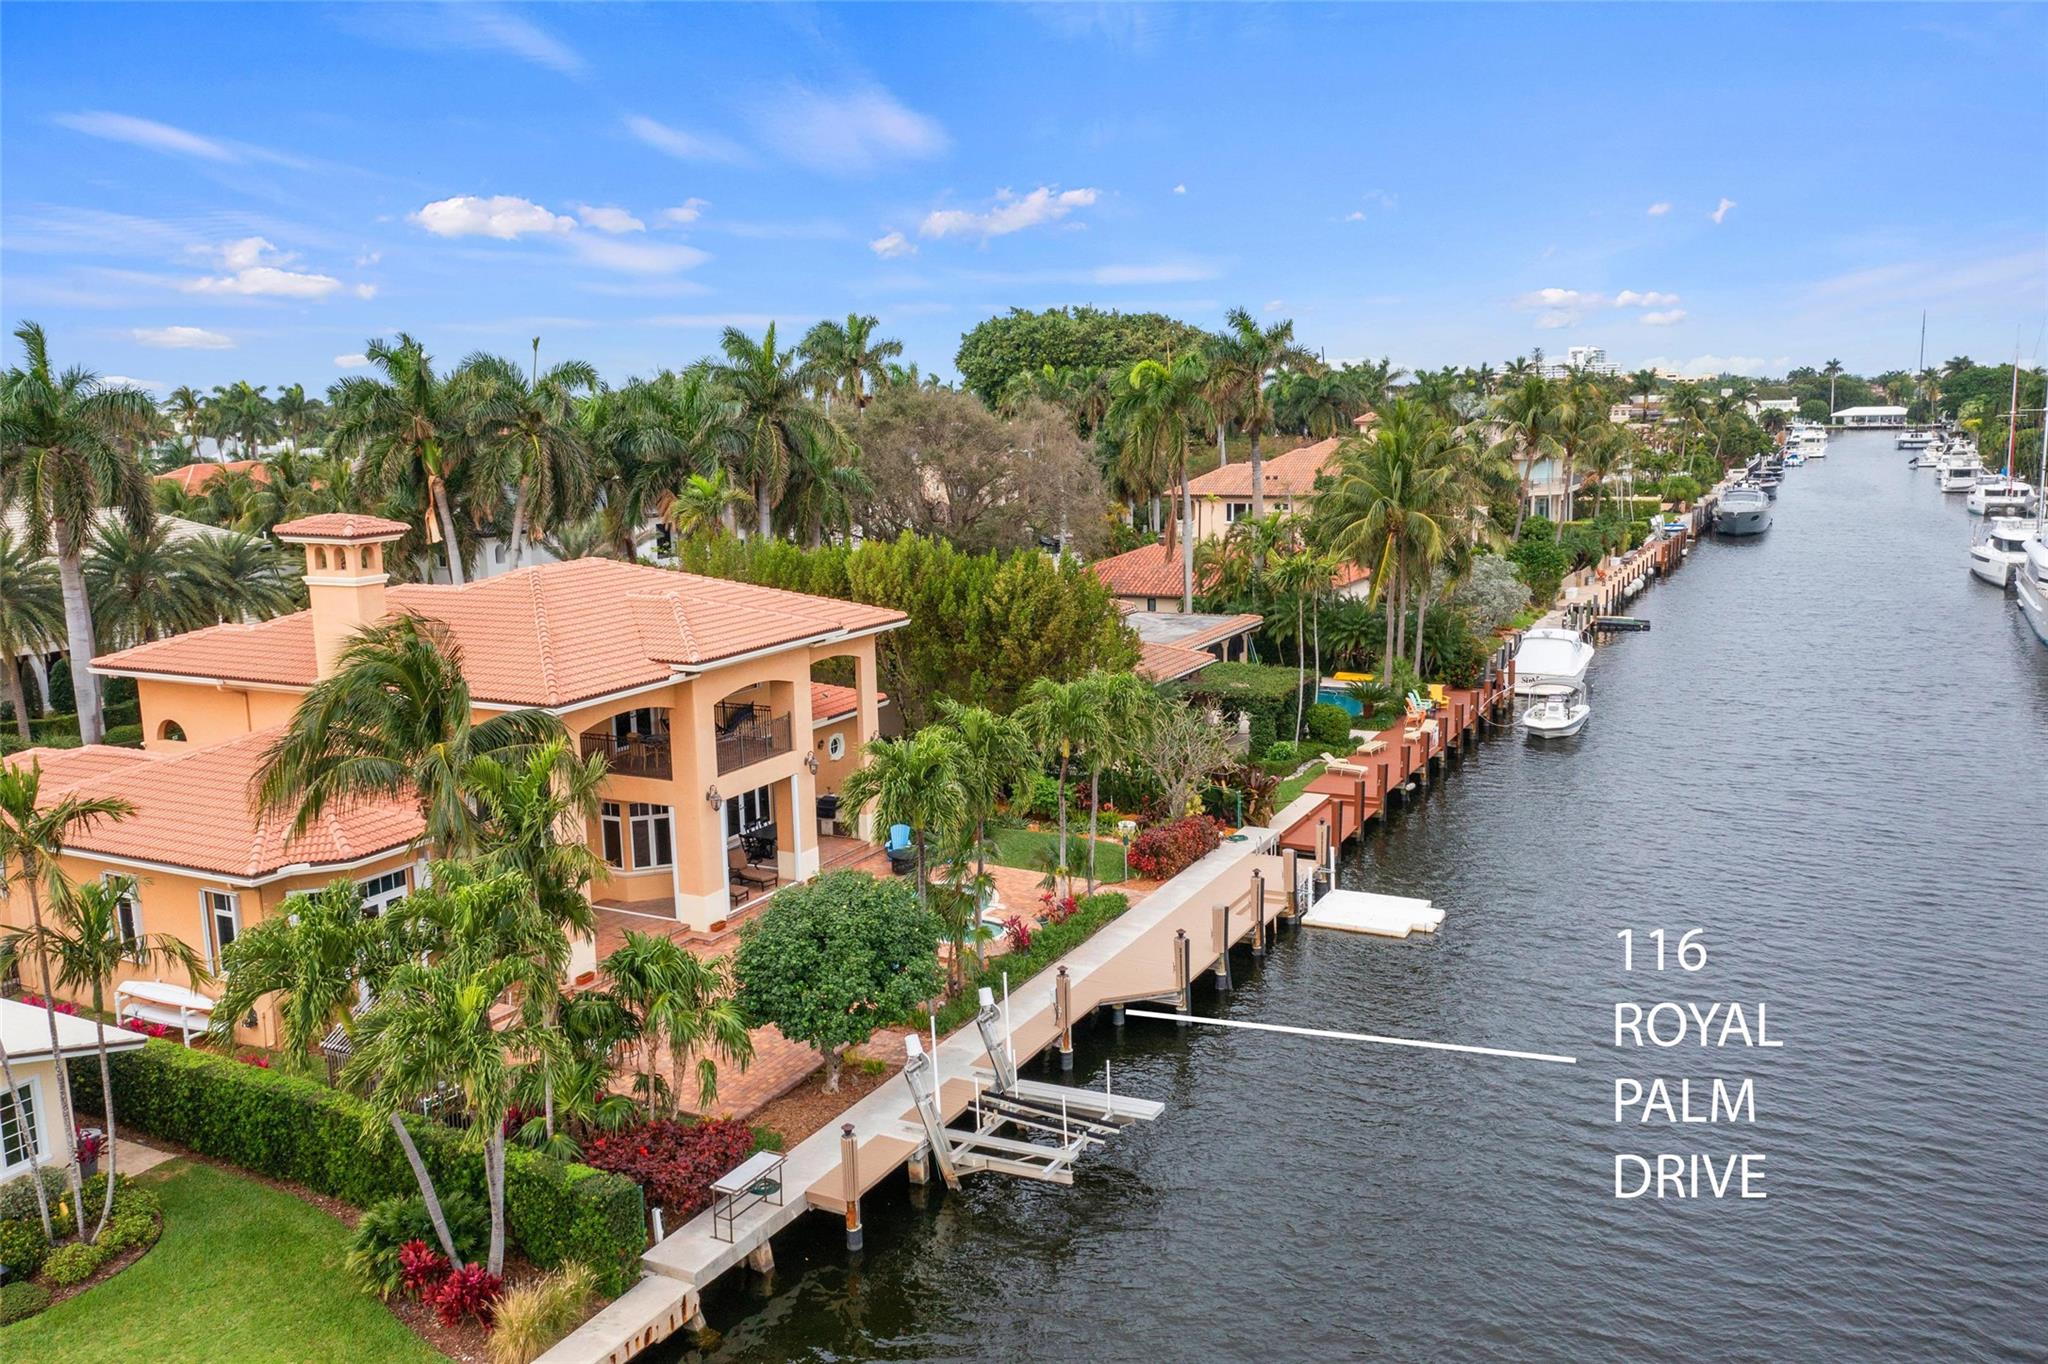 100-FT DEEPWATER ON APPROX 100 FT WIDE CANAL | 0.275± ACRES |CHARTS SHOW 9-10 FT CANAL DRAFT WITH TURN BASIN | 110 POWER & WATER TO DOCK | STREET HAS UNDERGROUND UTILITIES INCLUDING NATURAL GAS | IMPACT GLASS & ADDITONAL SHUTTERS FOR DOUBLE PROTECTION | ENTIRE HOUSE NAT GAS GENERATOR | SALTWATER POOL IS GAS HEATED | WIDE CAP SEAWALL WITH BATTER PILES | SUMMER KITCHEN WITH WET BAR & ELECTRIC | TWO STORY GREAT ROOM WITH FIREPLACE & ART NICHES | WET BAR WITH CHILLED WINE STORAGE | LOFT AREA FOR GYM OR OFFICE | MARBLE & WOOD FLOORS | PRIMARY BR: GROUND FLOOR WITH WOOD FLOORS | PRIMARY BATH: MARBLE & SPA BATH | ISLAND KITCHEN: TRANSOM WINDOWS & TWO SINKS & BASSWOOD CABINETS | 3-CAR GARAGE | GAS COOKING & RECIRCULATING HOT WATER HEATER | TERMITE POLICY | TUTHILL ARCHITECTURE